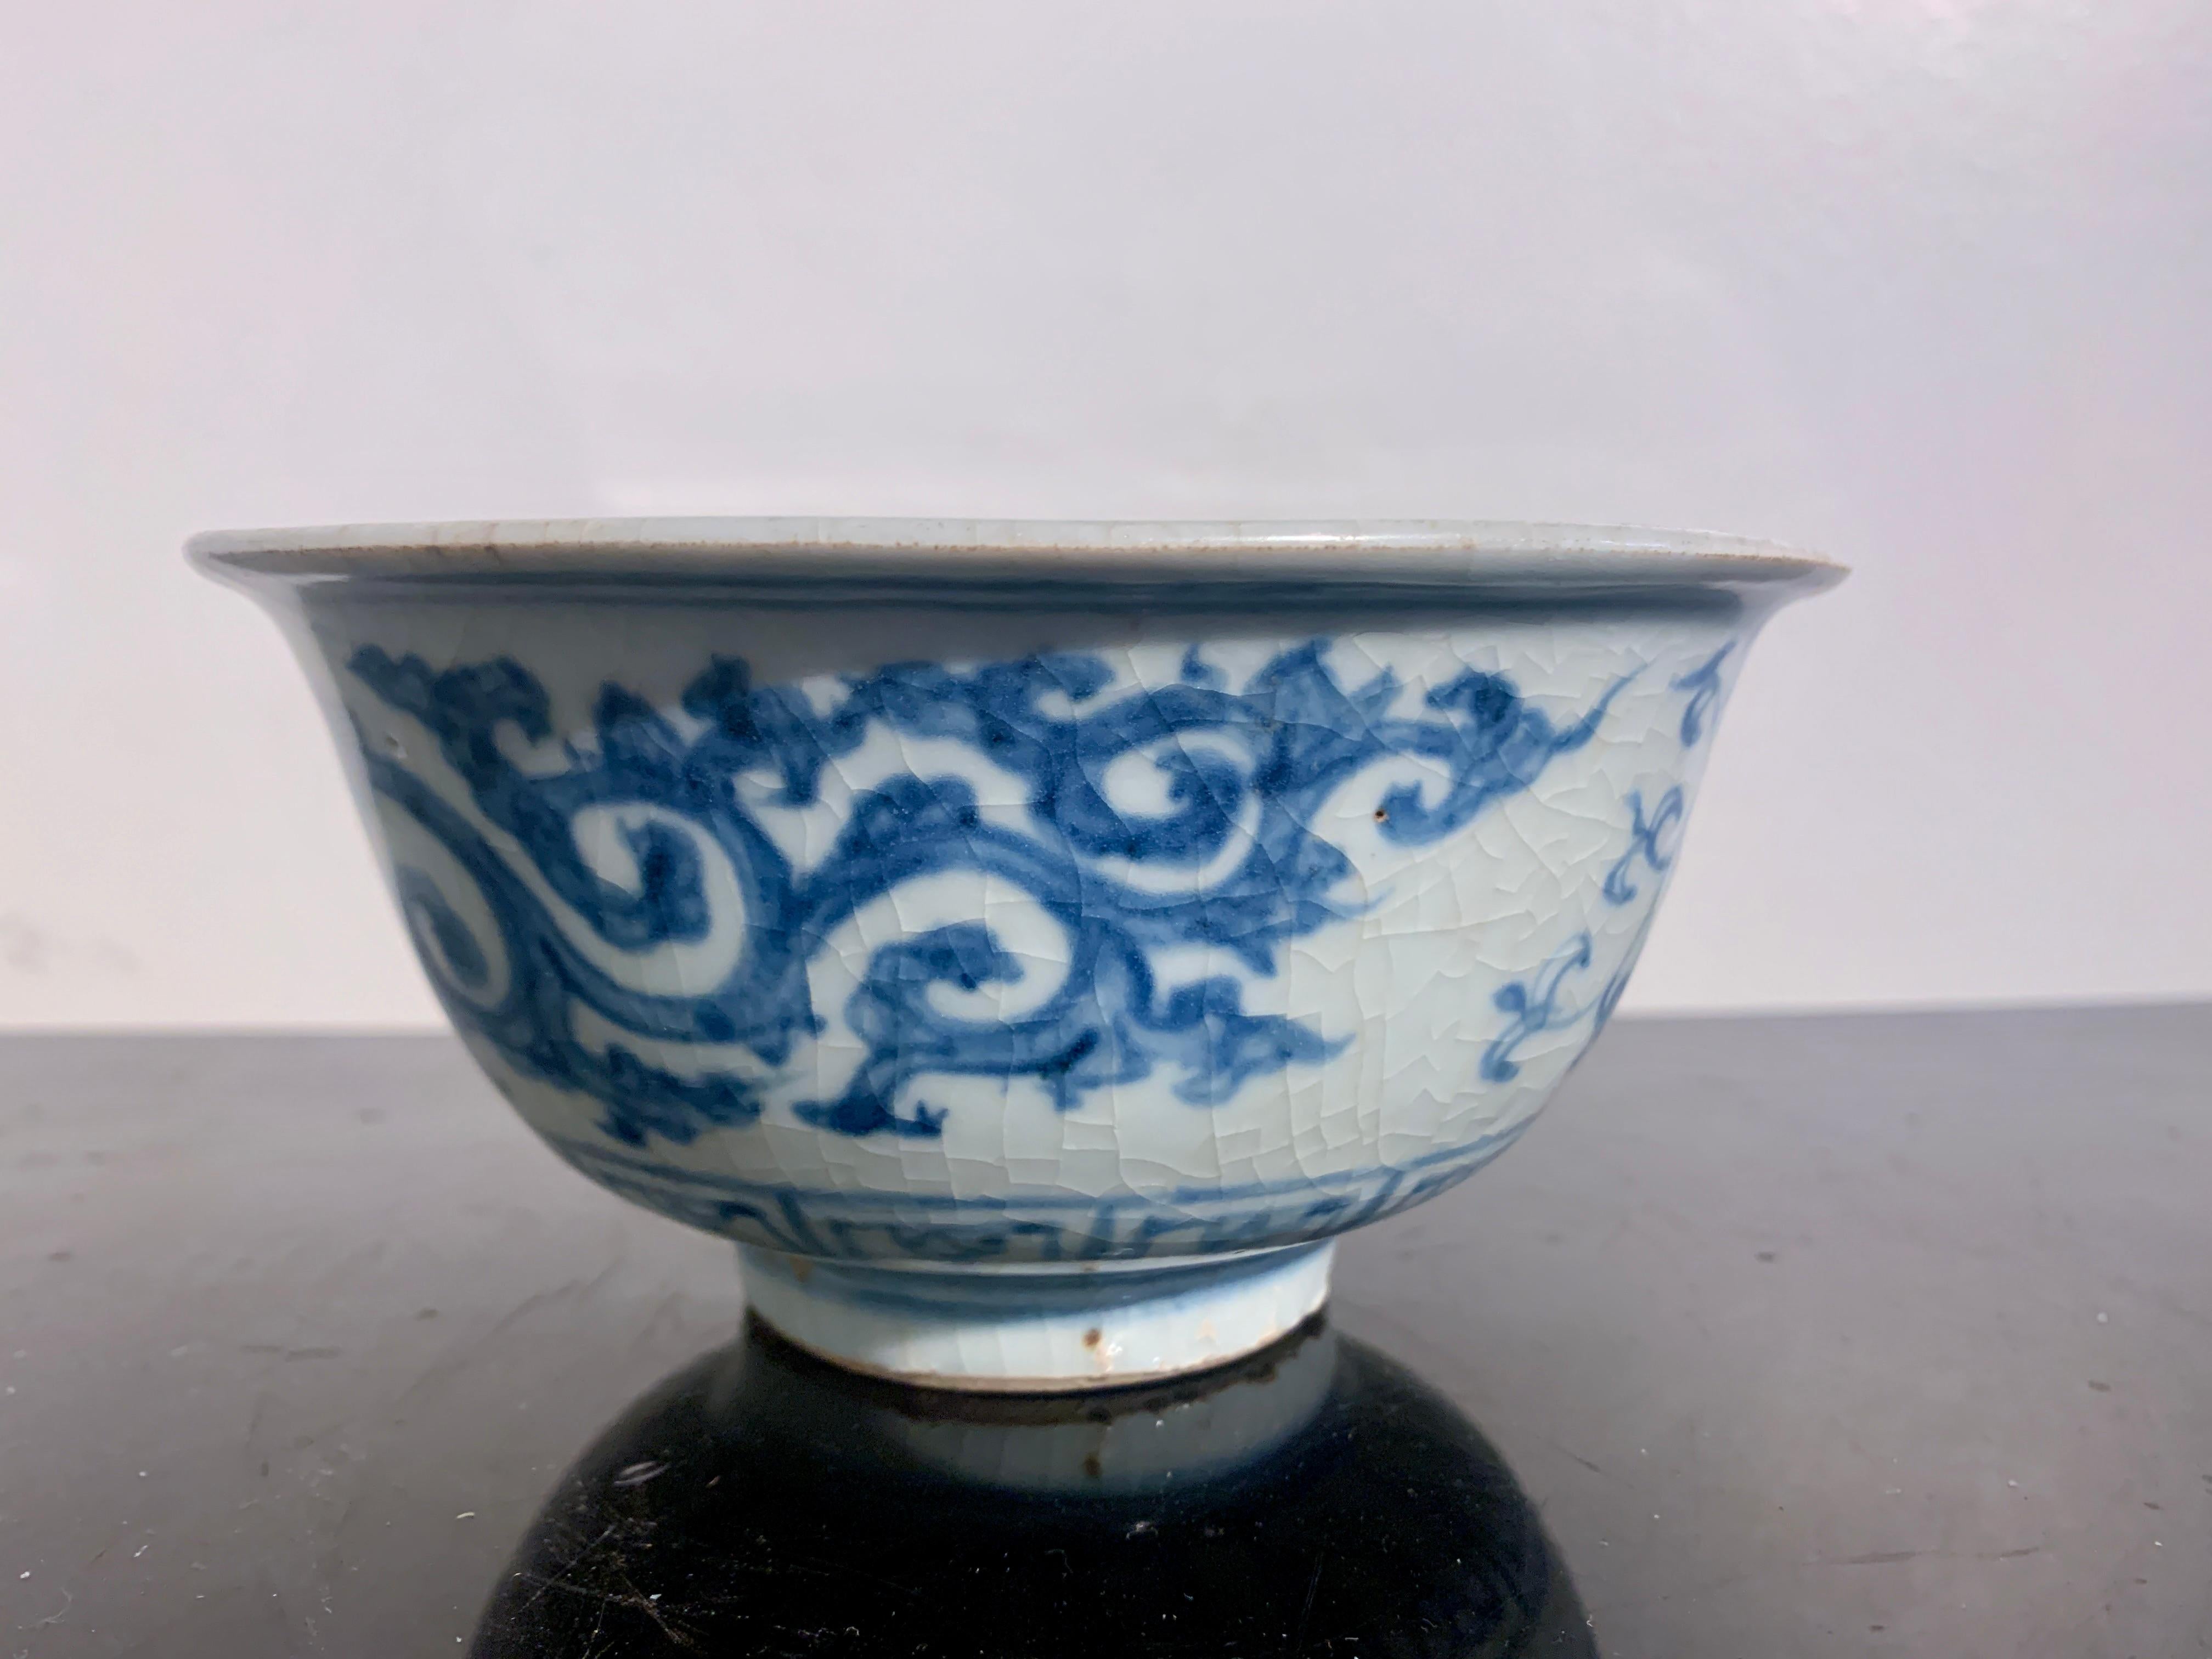 the dragon on the 16th century bowl from the chinese ming dynasty is best described as